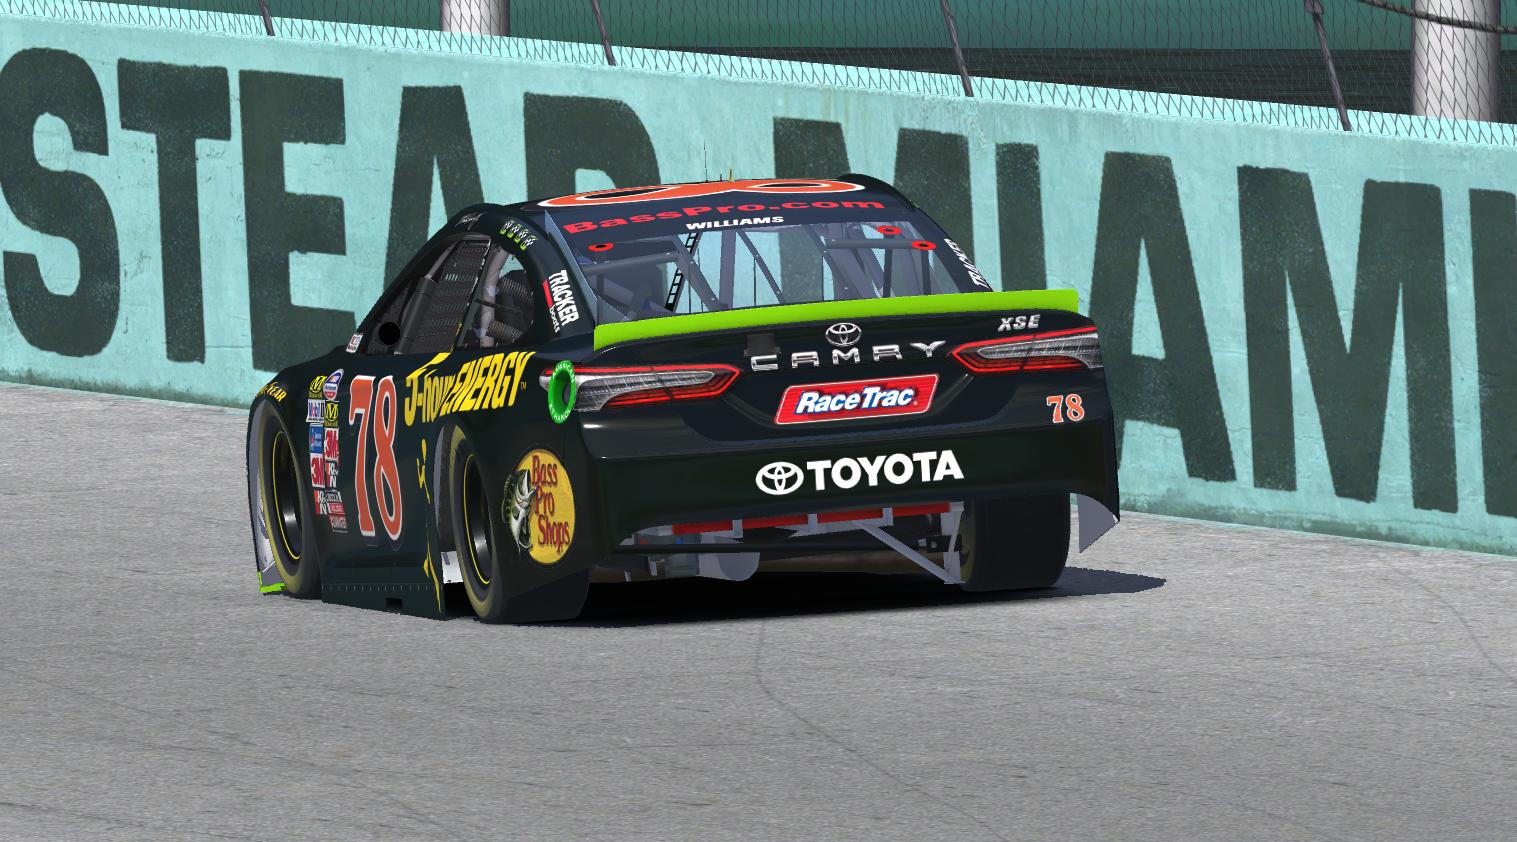 Preview of Martin Truex Jr. Final Furniture Row Racing Toyota by Justin M. Williams